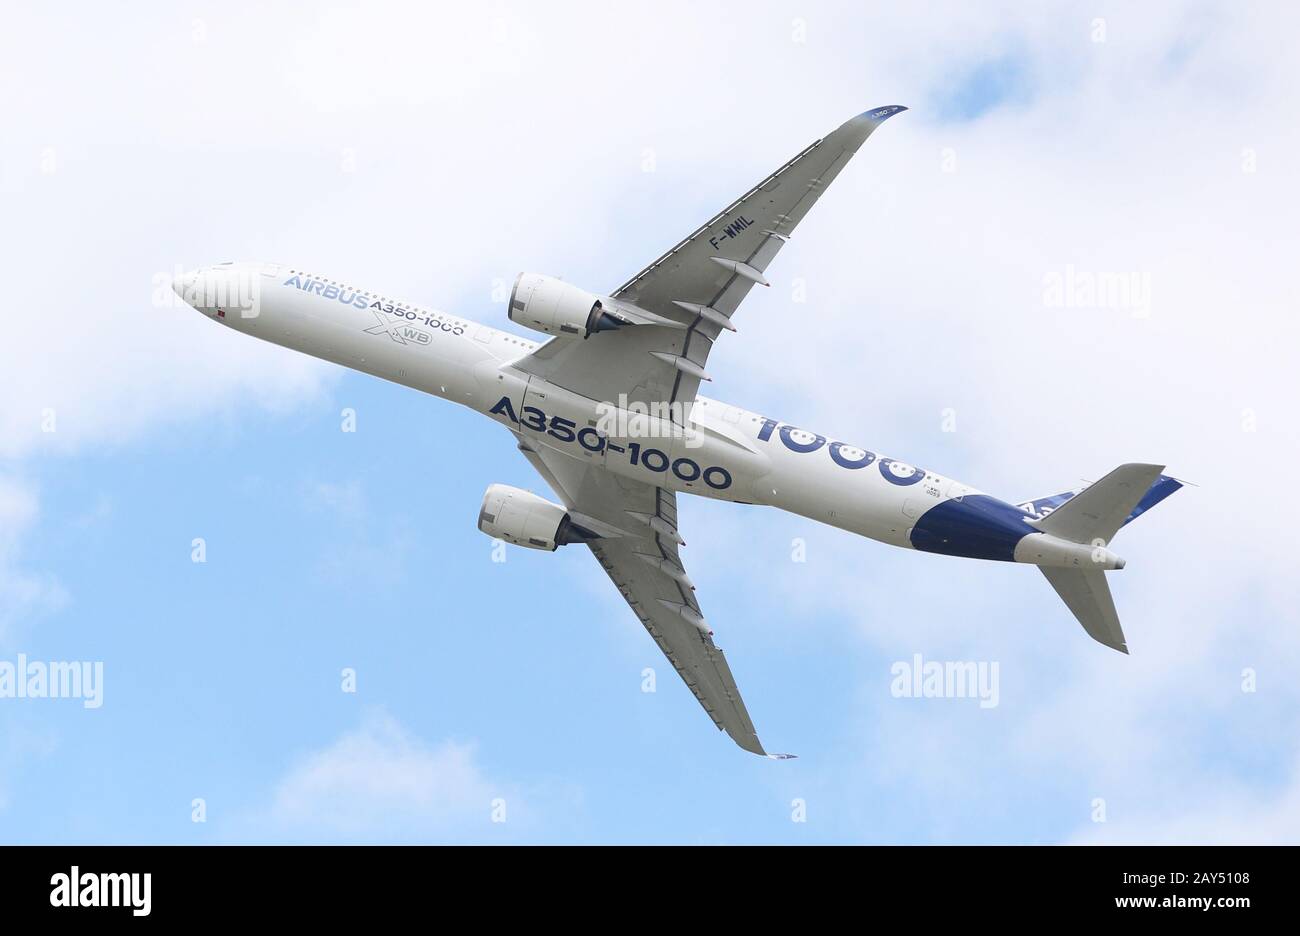 Paris, France. 20th June, 2019. File photo shows that an Airbus A350-1000 performs during a flight display at the 53rd International Paris Air Show held at Le Bourget Airport near Paris, France, June 20, 2019. France-based European plane maker Airbus on Thursday reported a net loss of 1.36 billion euros (1.47 billion U.S. dollars) in 2019 after paying billions of euros of provision to settle a past bribery and corruption case related to jetliner sales. Credit: Gao Jing/Xinhua/Alamy Live News Stock Photo